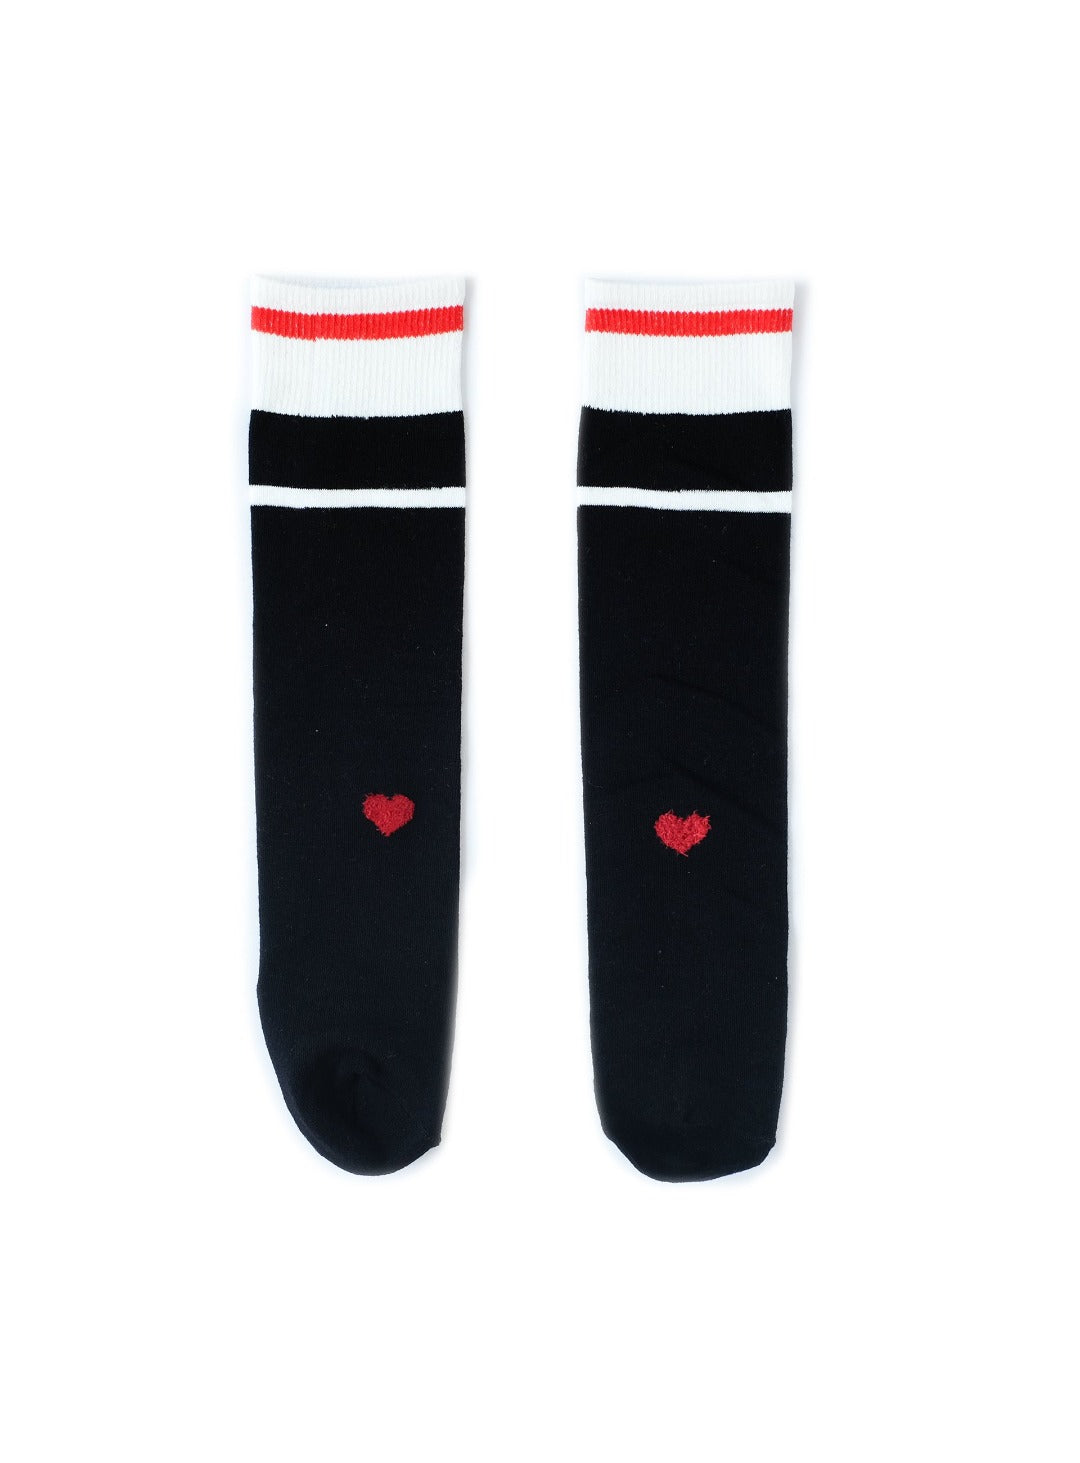 midi length black socks with white and red stripe